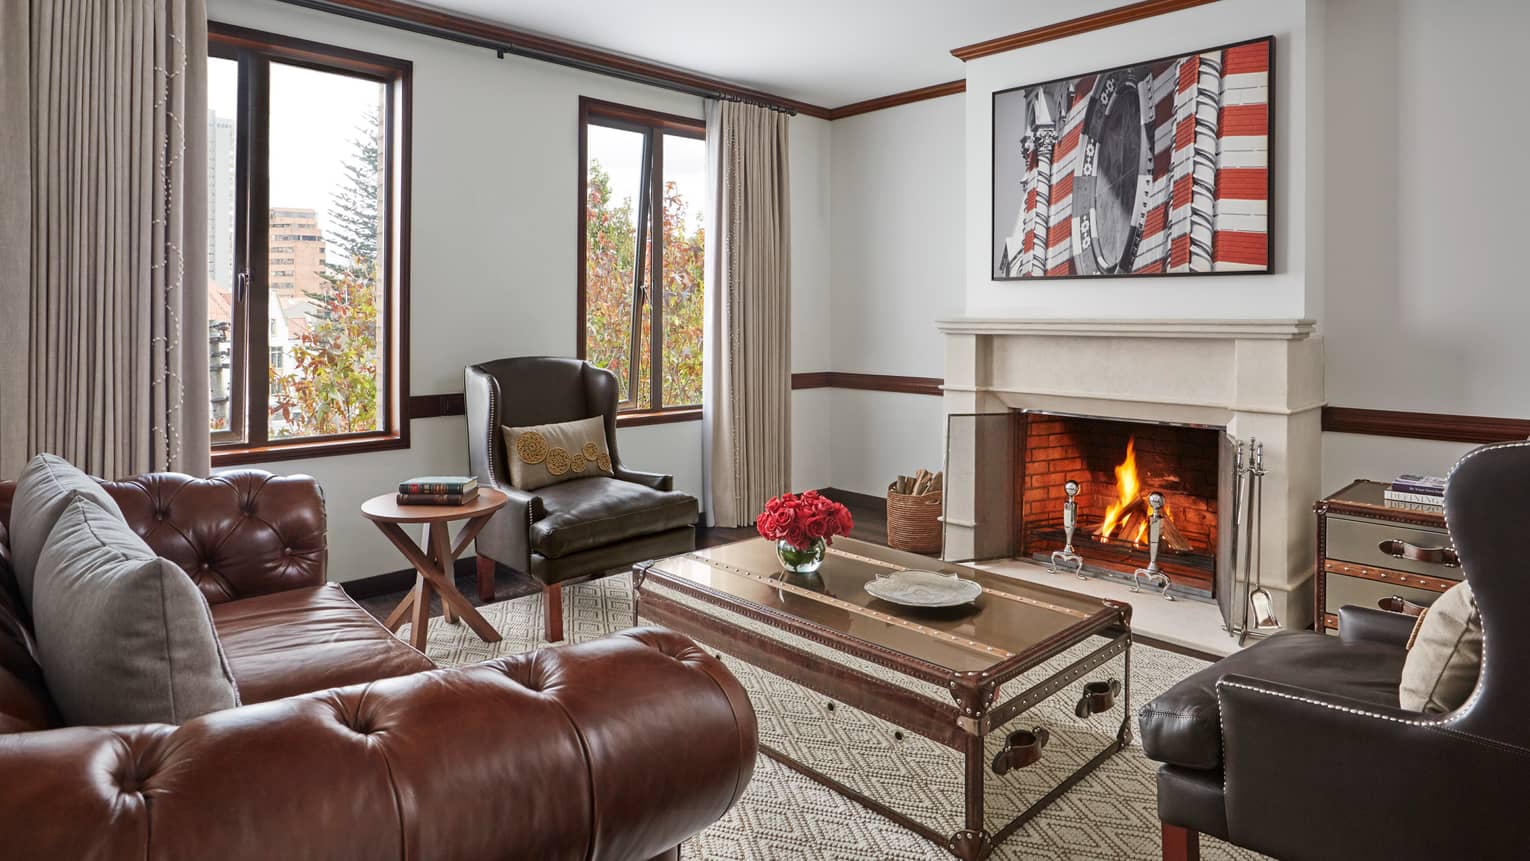 Hotel living room with brown leather sofa and armchairs trunk-style coffee table in front of roaring fireplace